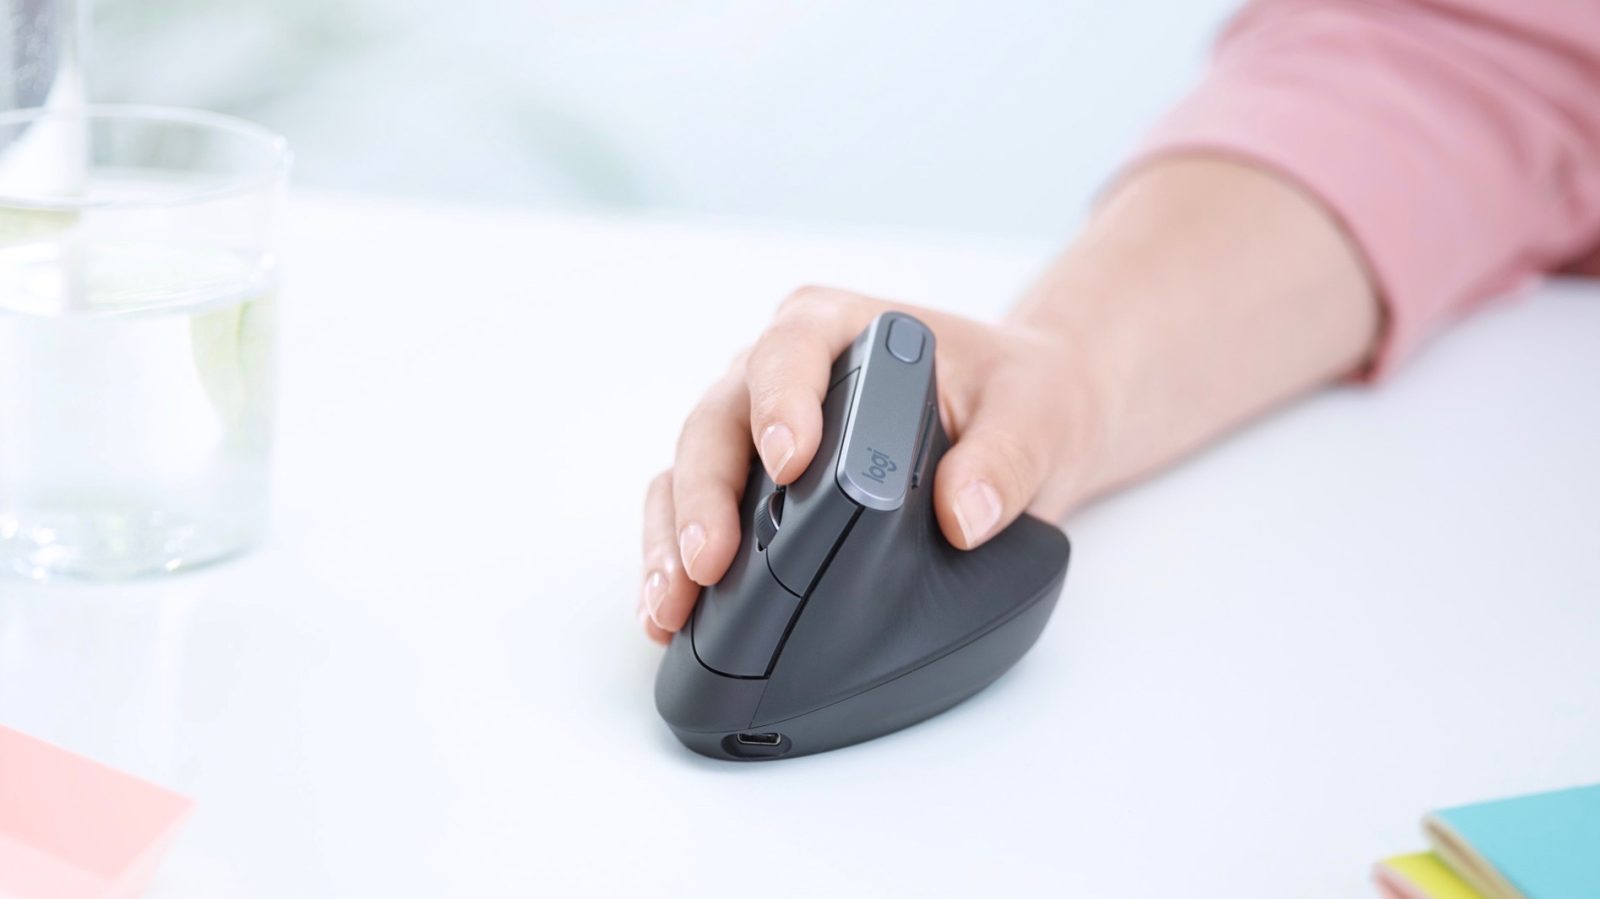 photo of Logitech launches MX Vertical mouse focused on ergonomics with ‘handshake position’ design image